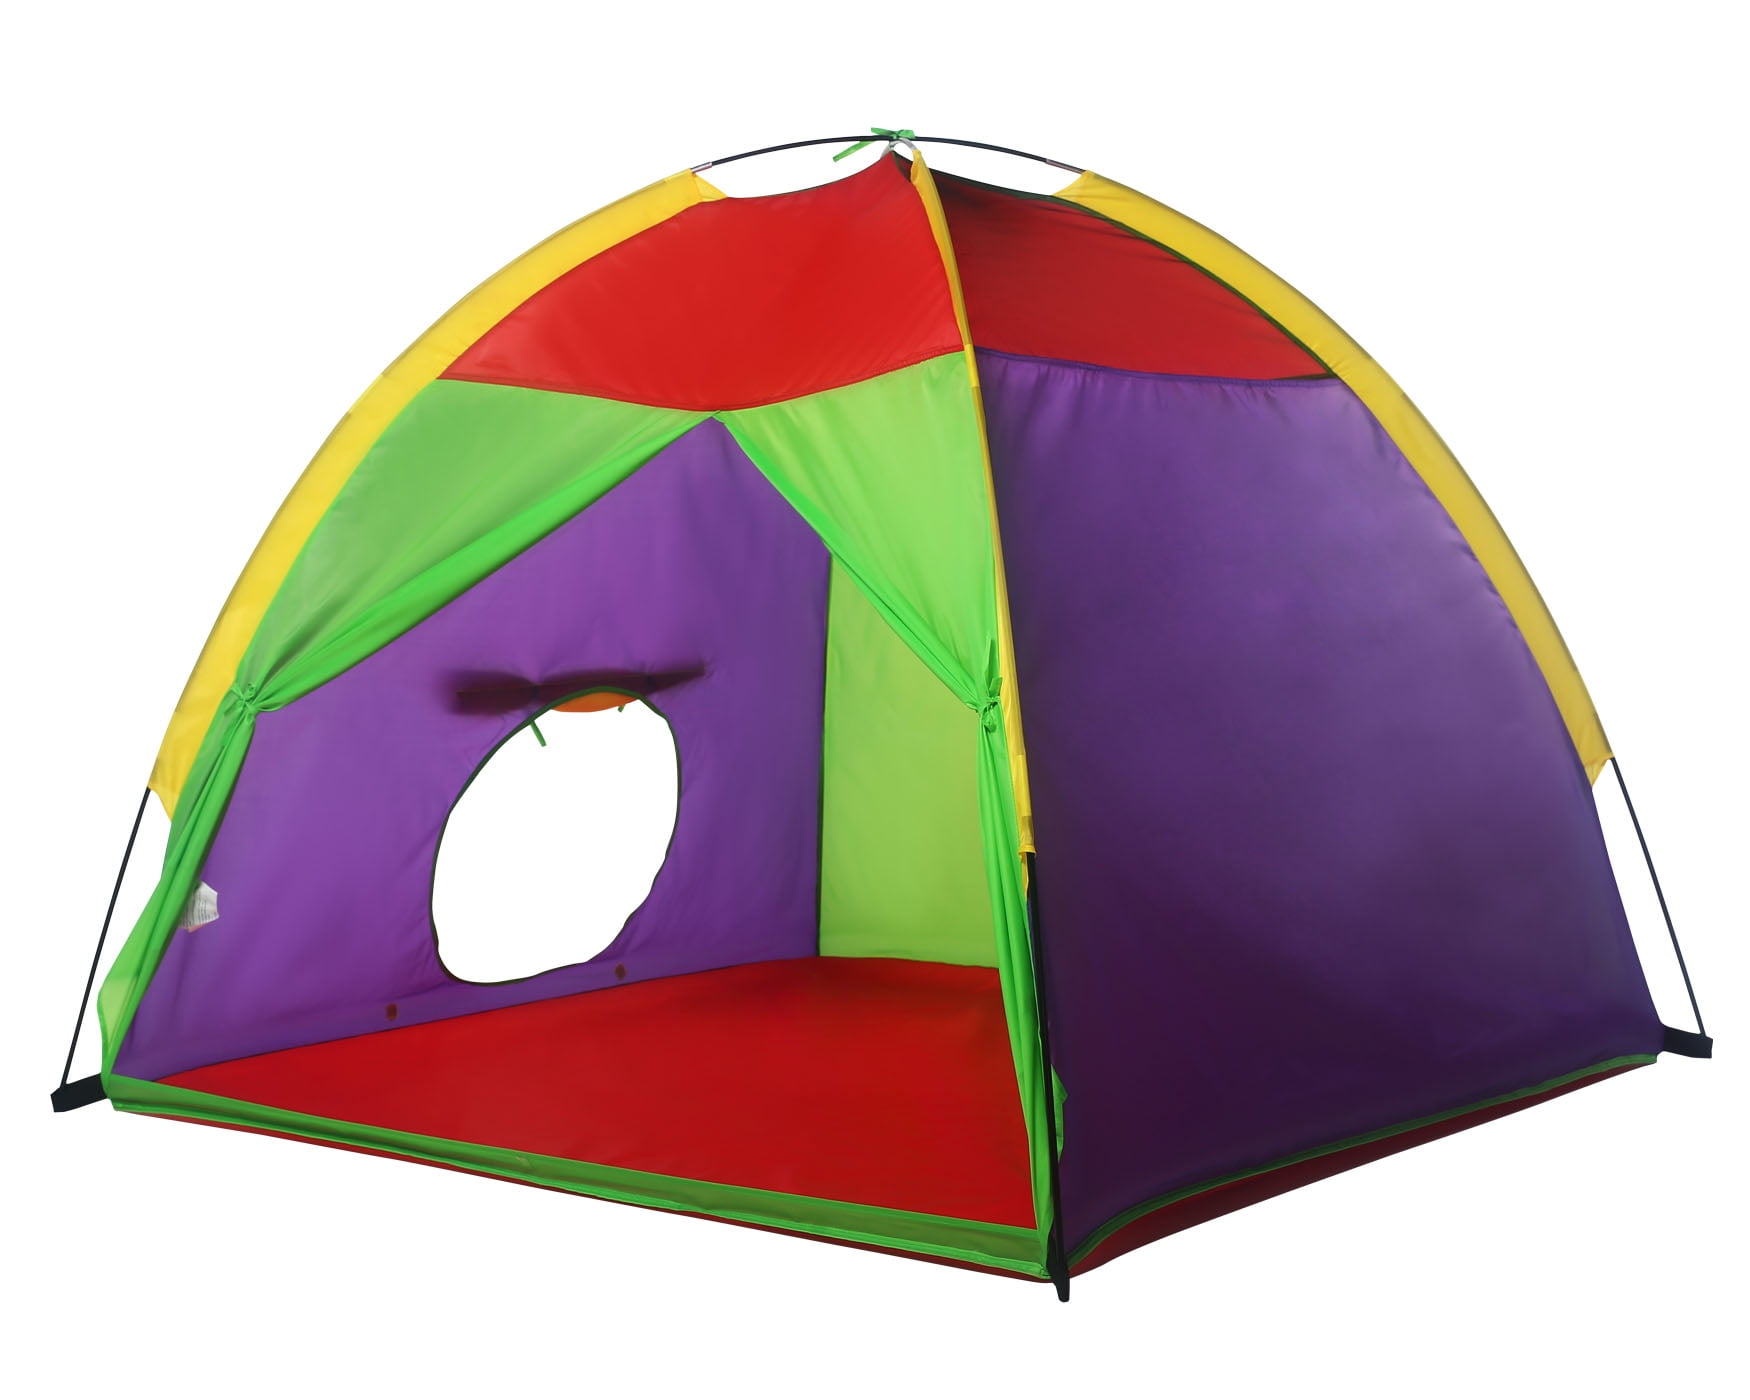 Details about   Alvantor Kids Tent Colorful play house Kids game zone